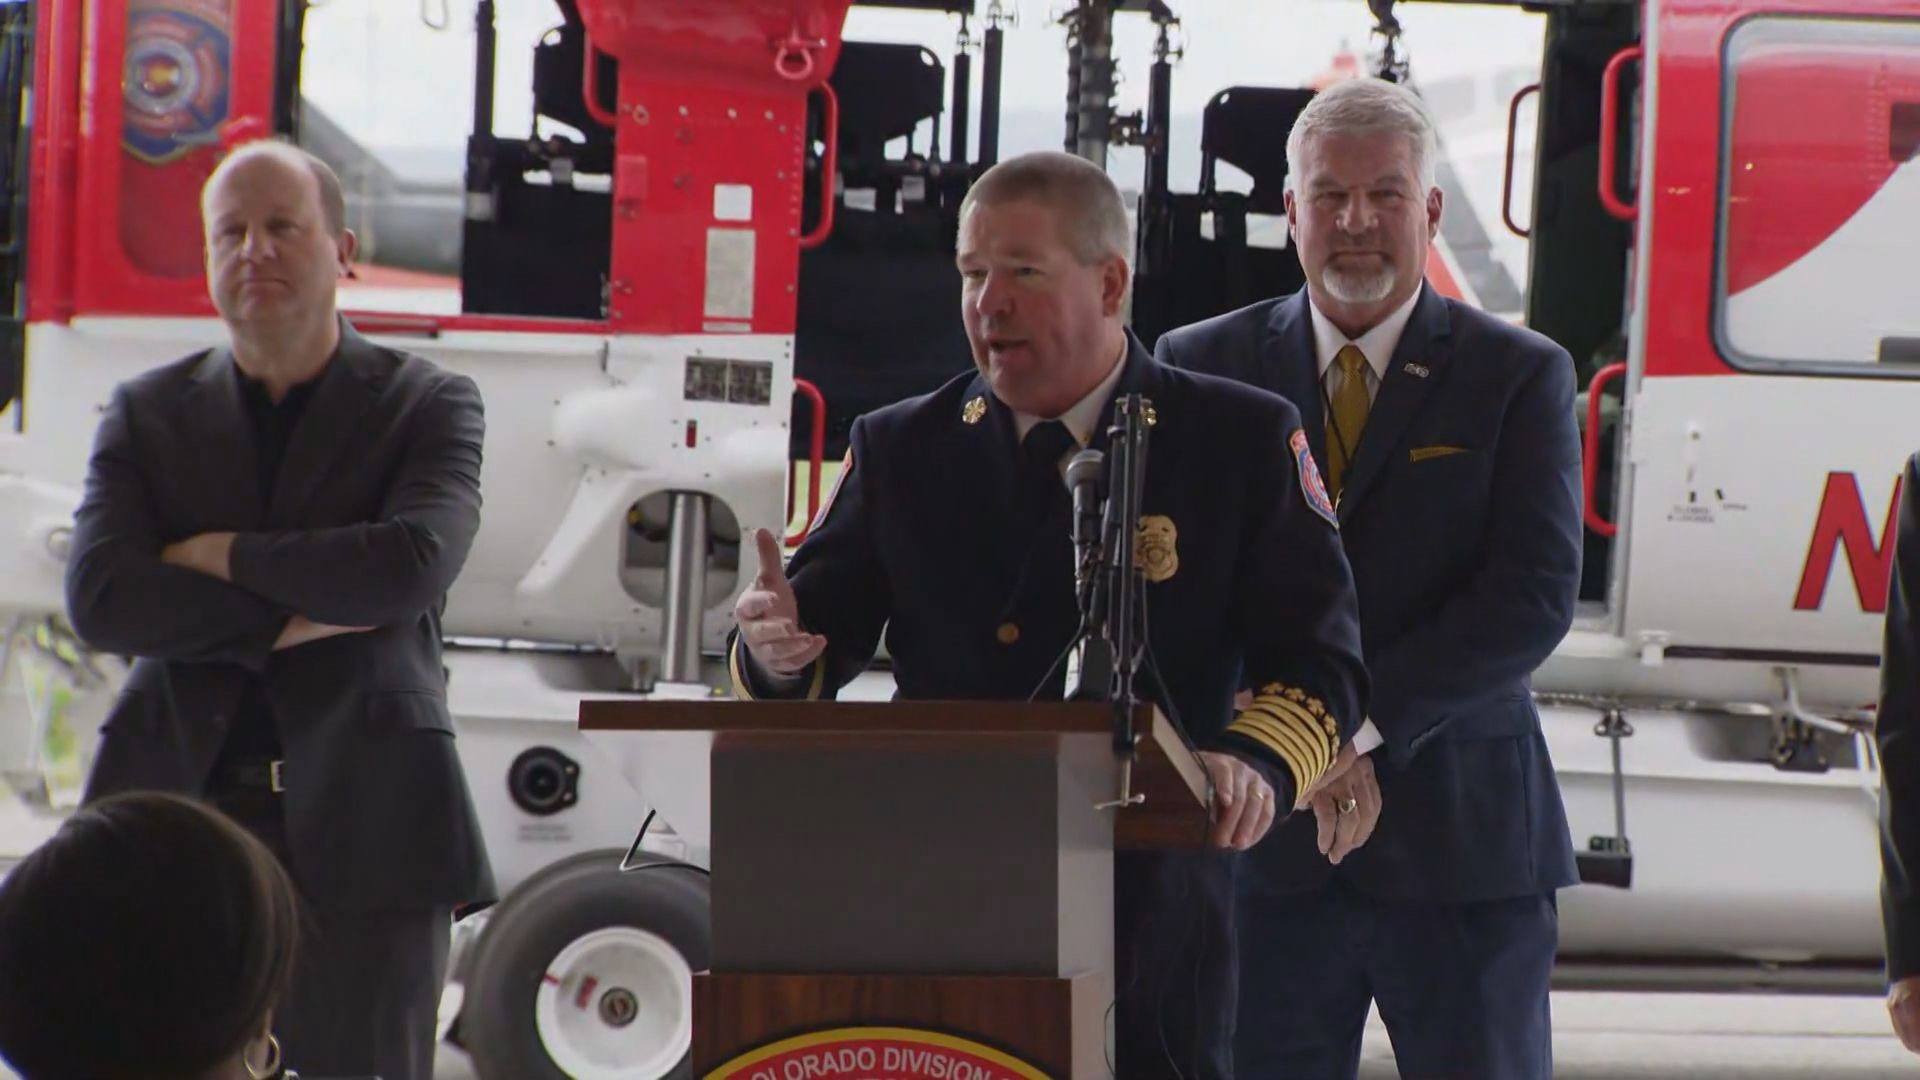 The Colorado Division of Fire Prevention and Control presented its outlook to Gov. Jared Polis Wednesday.